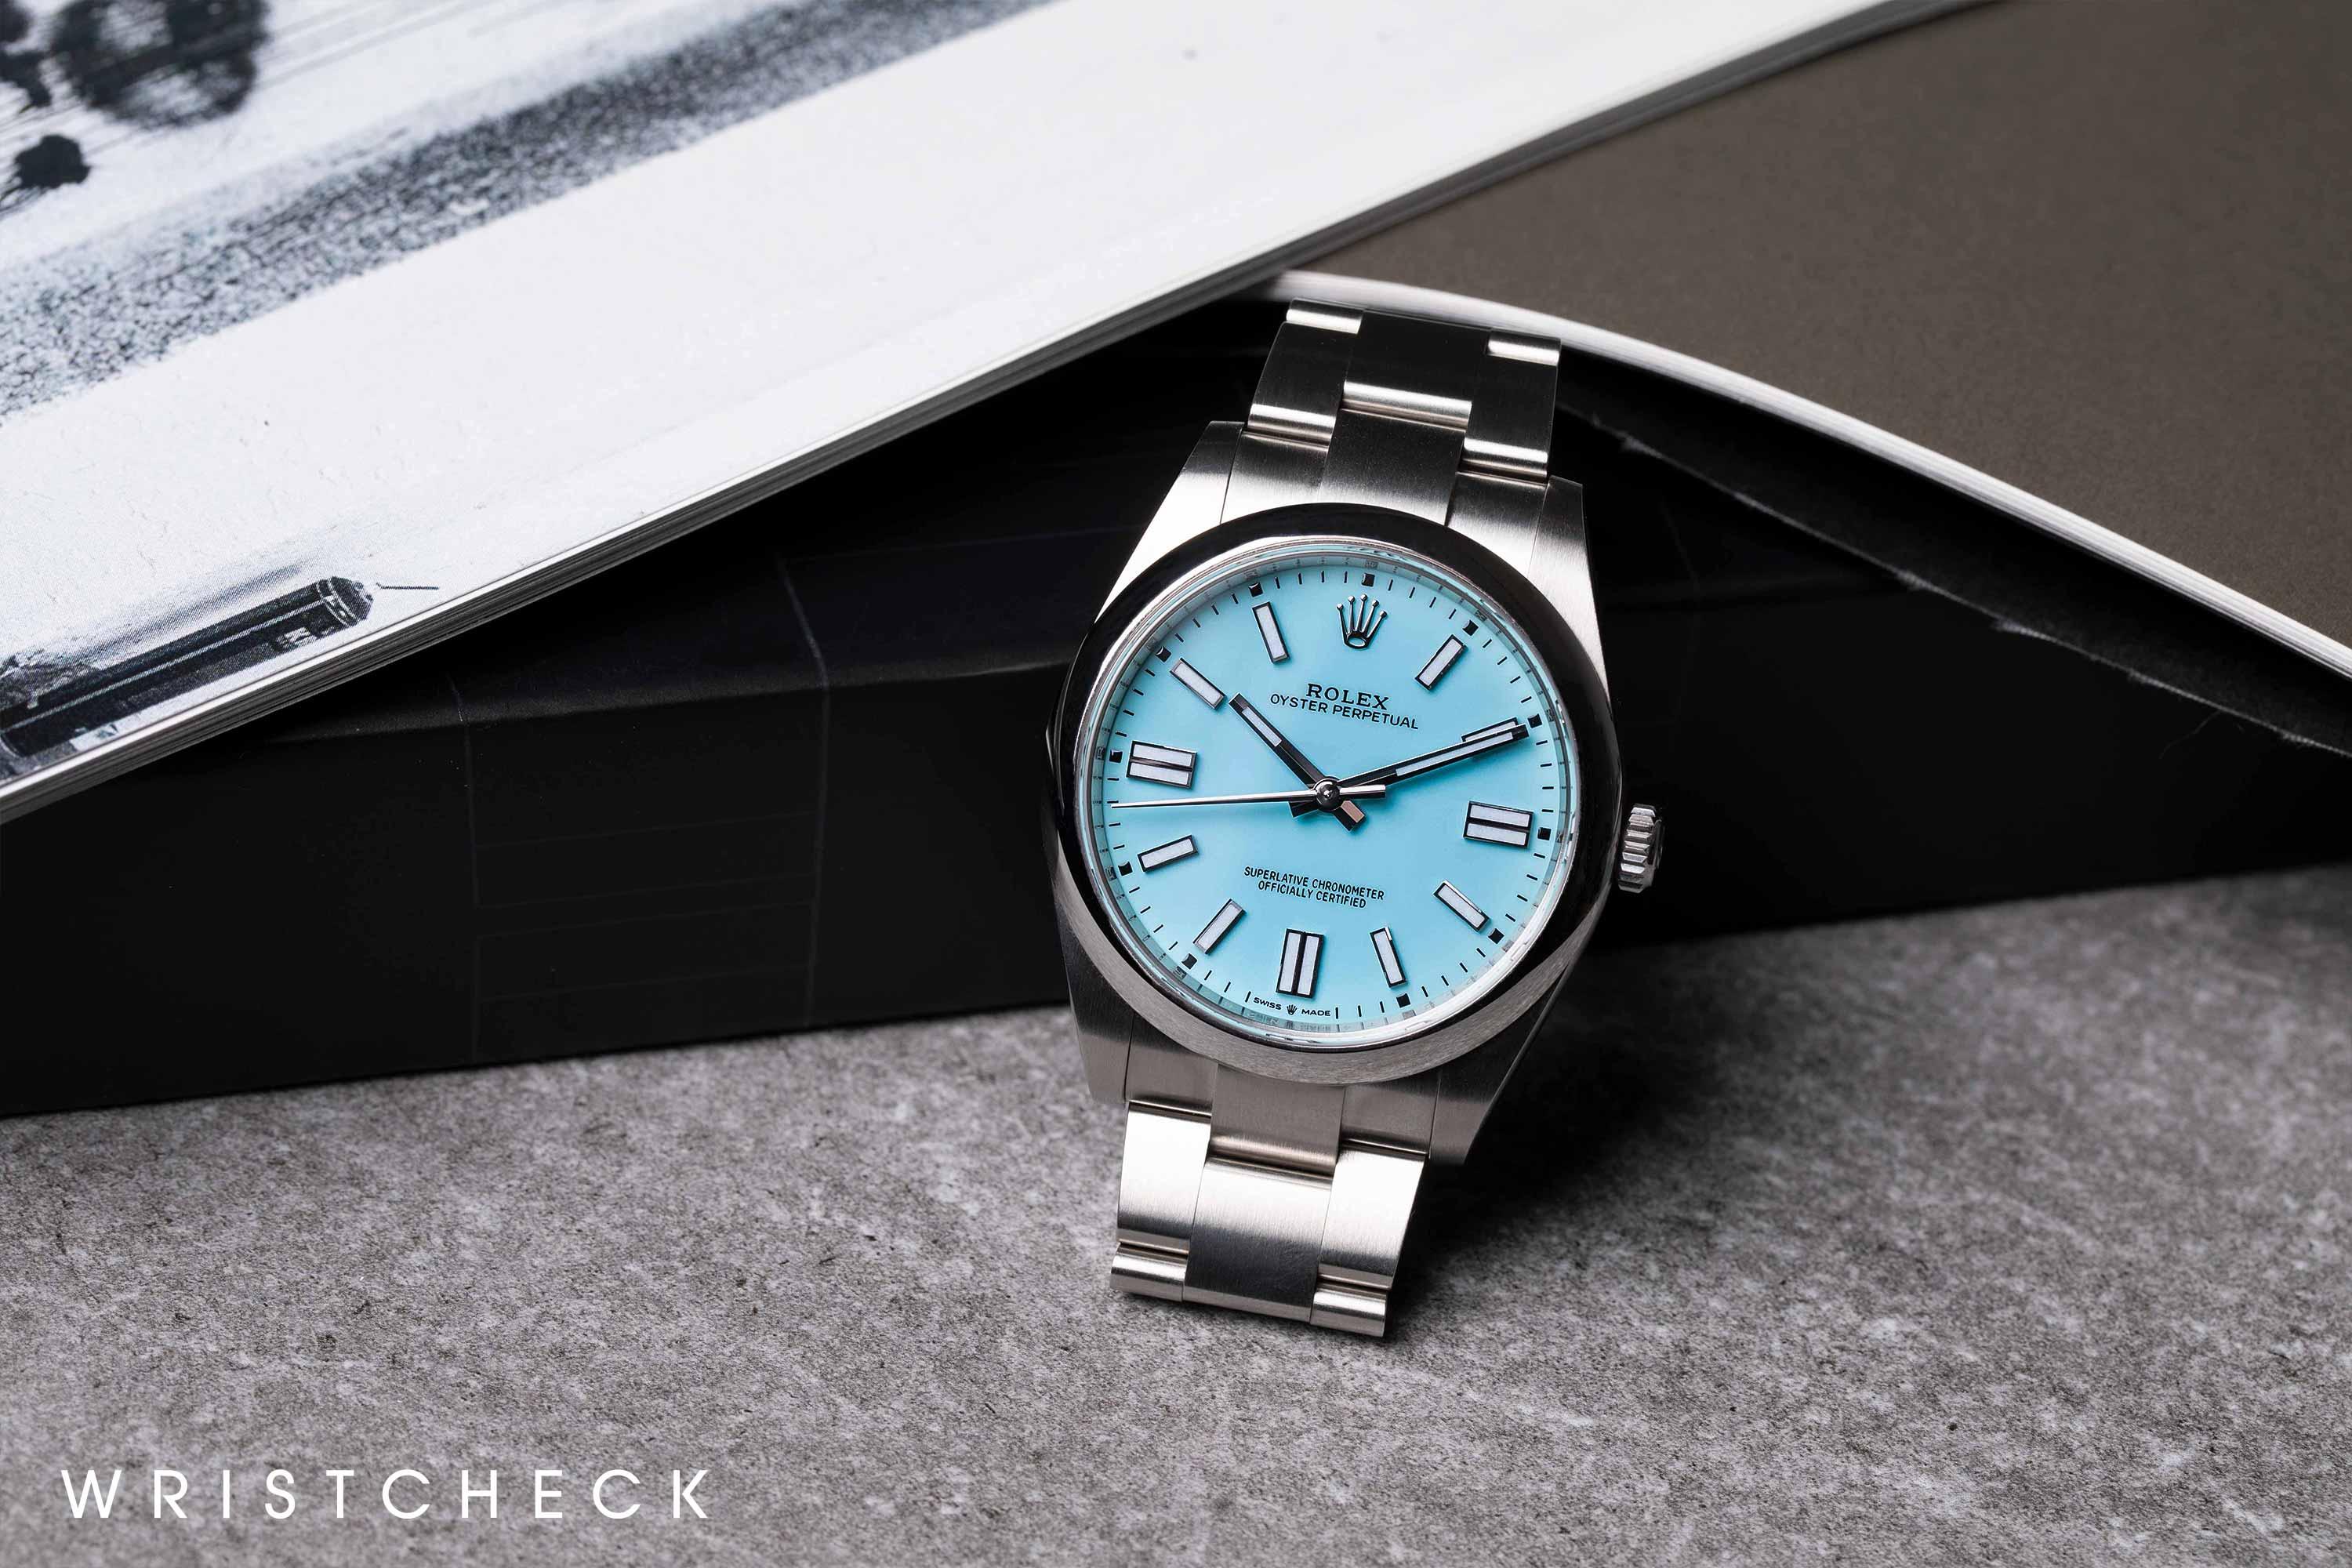 The turquoise Oyster Perpetual has proven so influential, connecting nostalgic collectors to a part of Rolex’s heritage